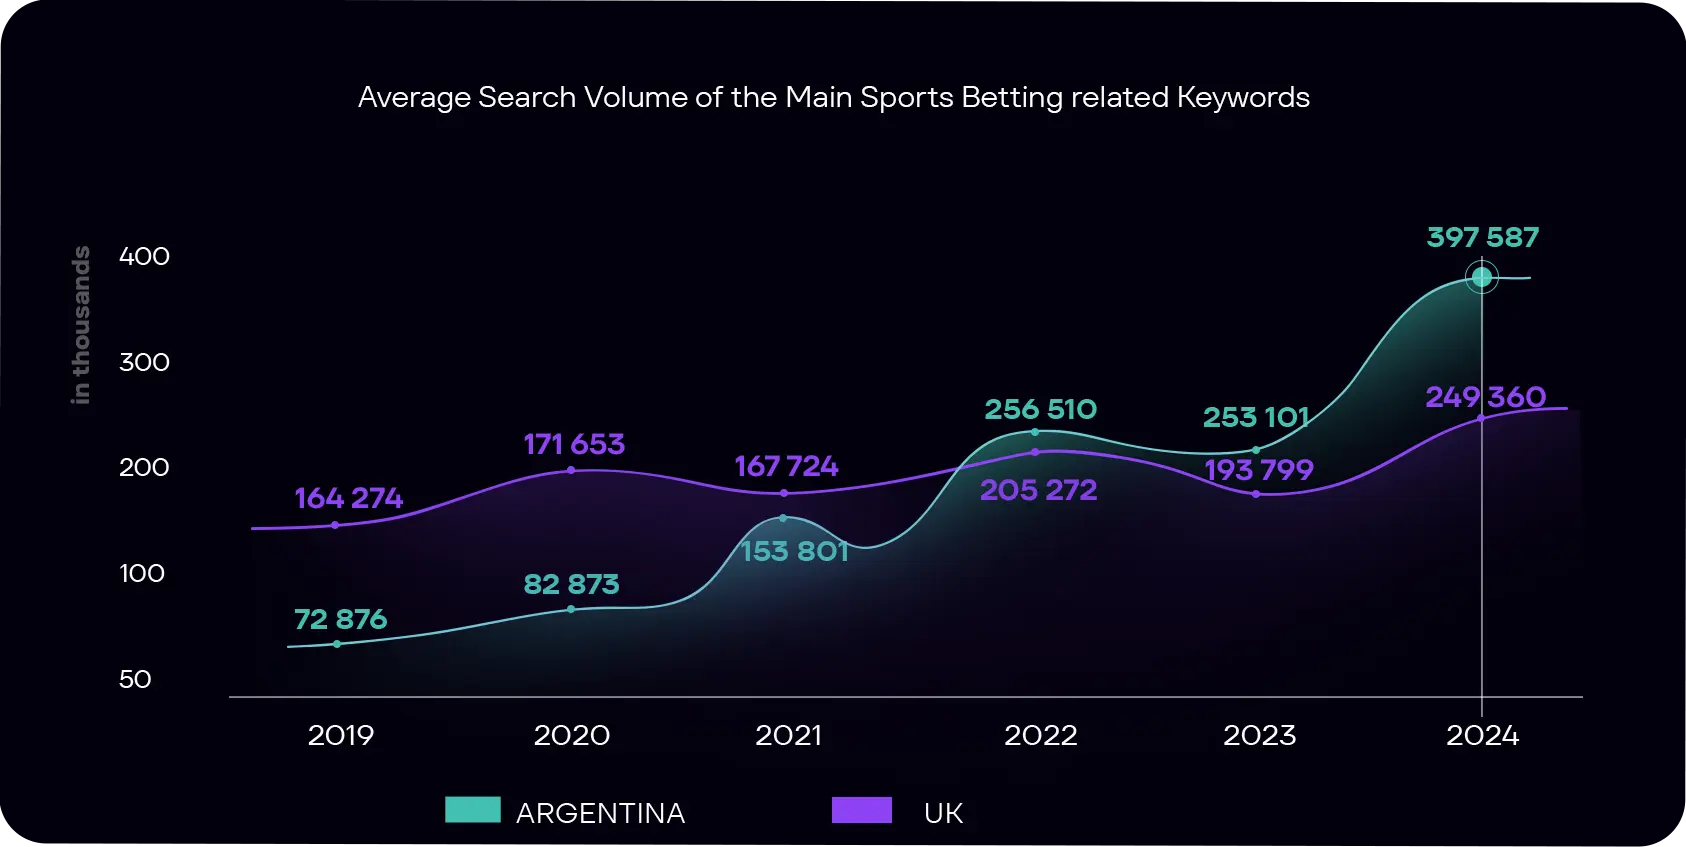 UK Vs Argentina how does developed vs developing markets compare to each other since 2019-2024